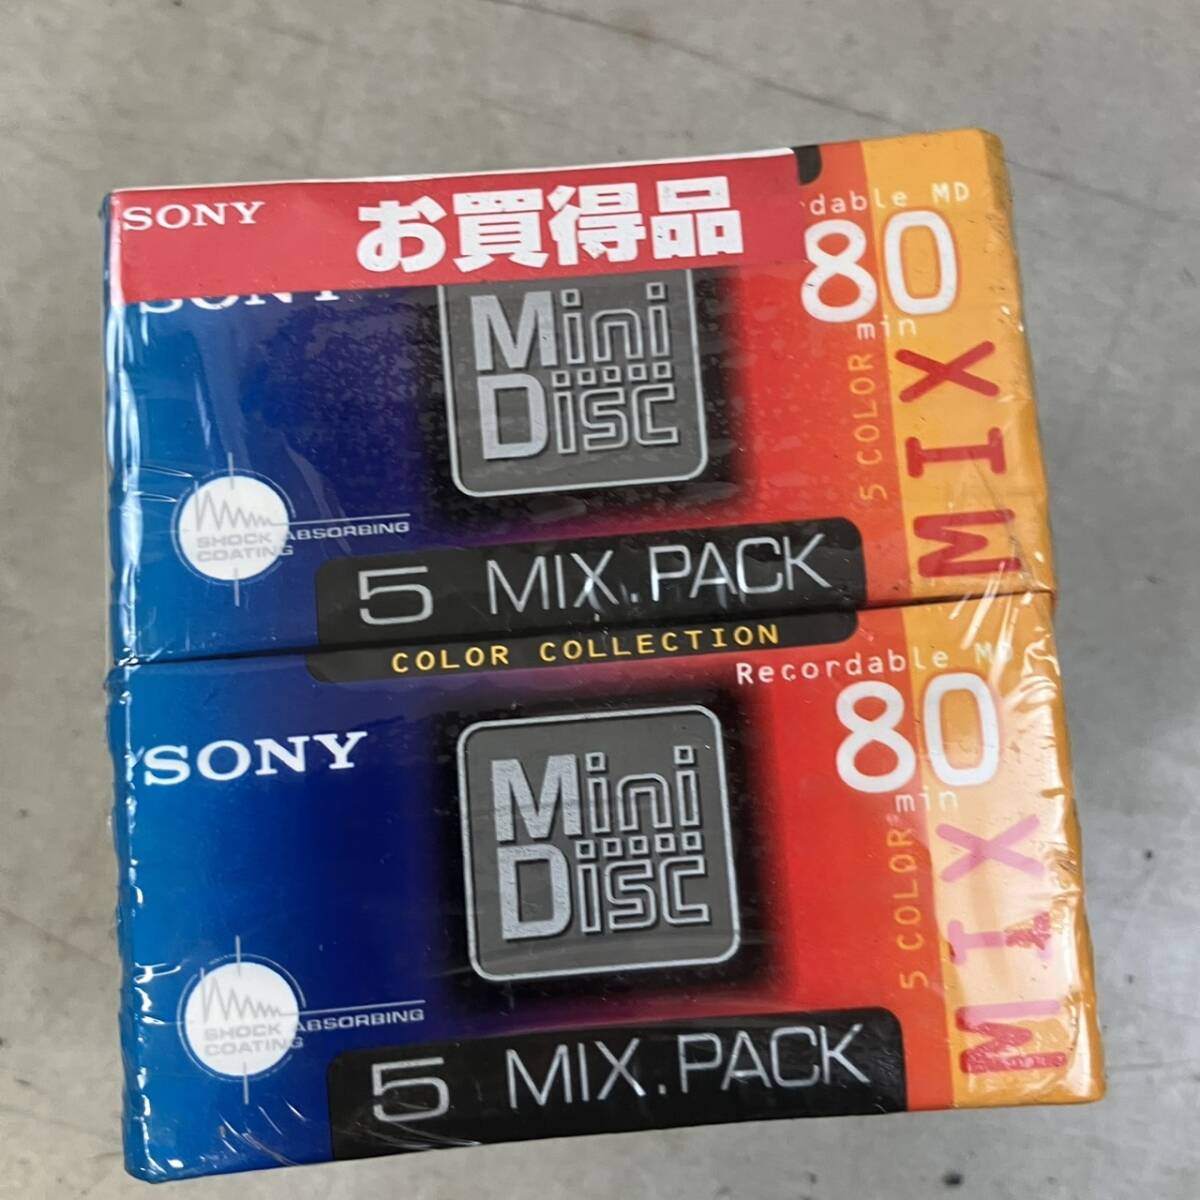 [4-157] SONY Mini D isc MD 80min 10個 ソニー COLOR COLLECTION の画像3